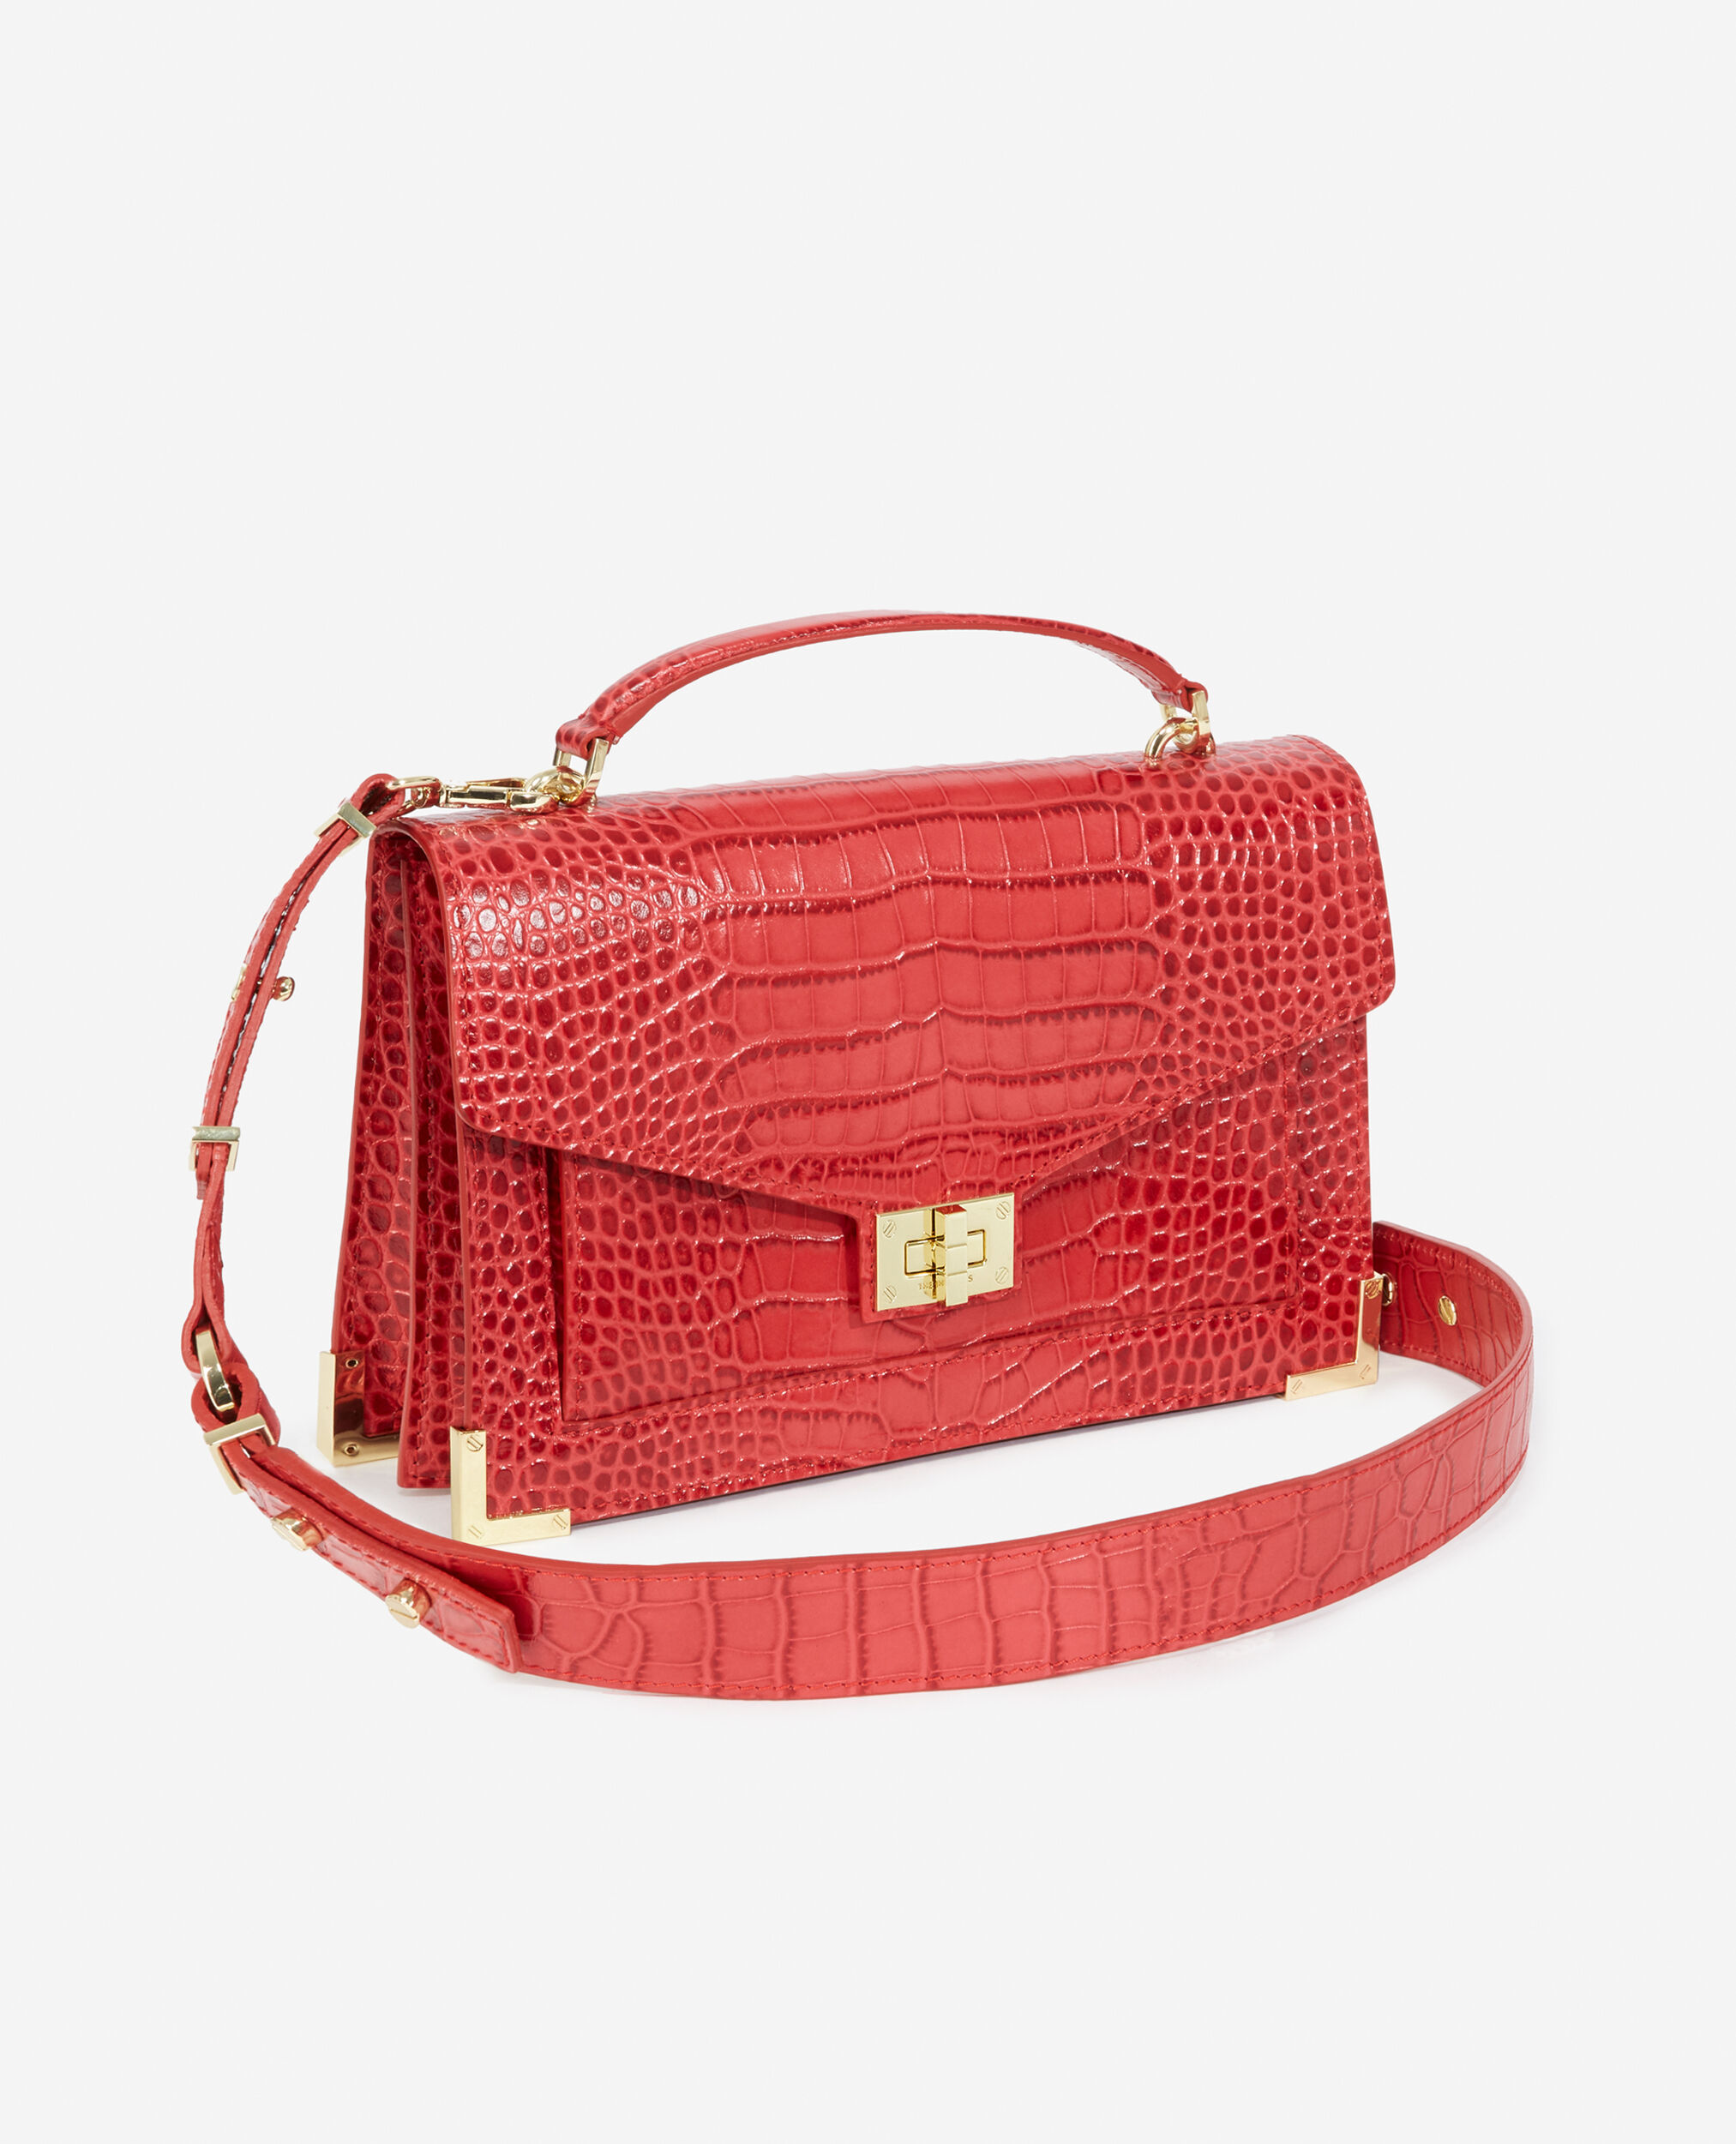 Medium-size croco-effect Emily Bag, RED, hi-res image number null